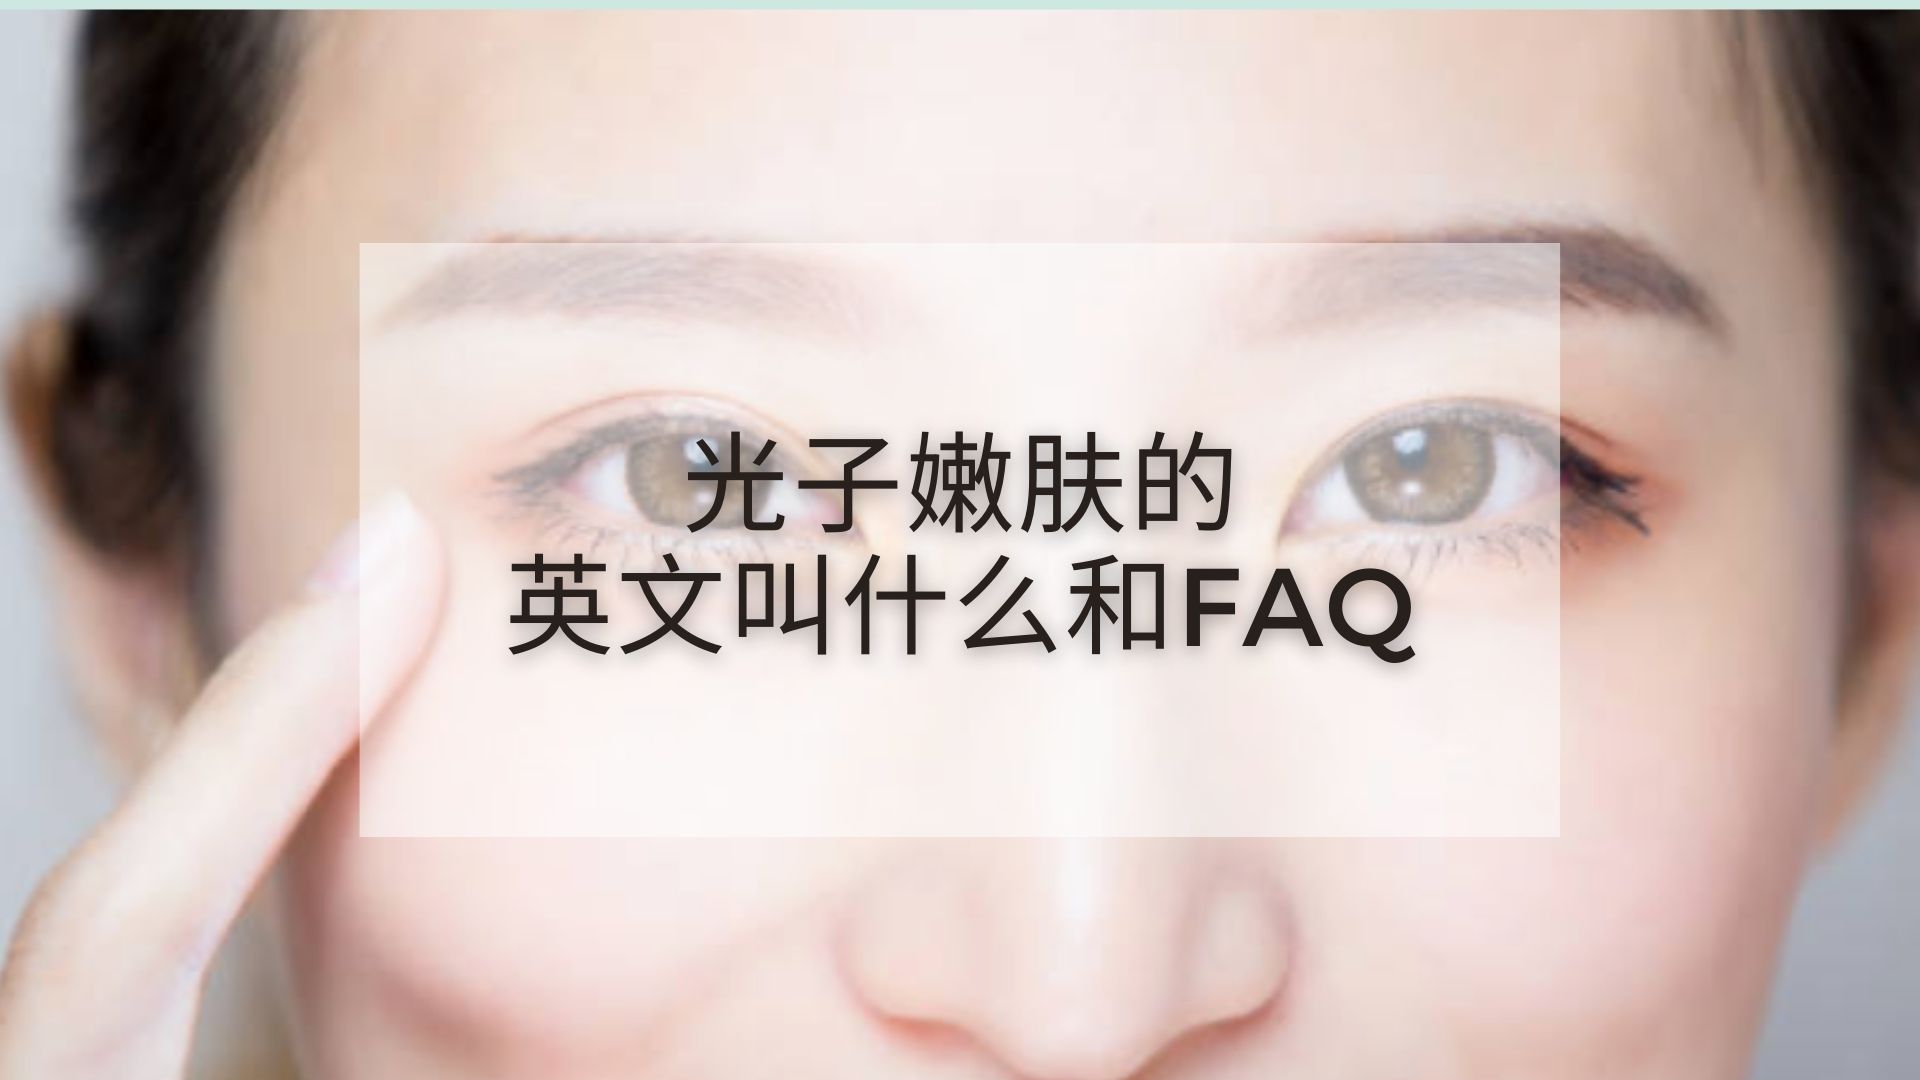 Read more about the article 光子嫩肤的英文叫什么和FAQ